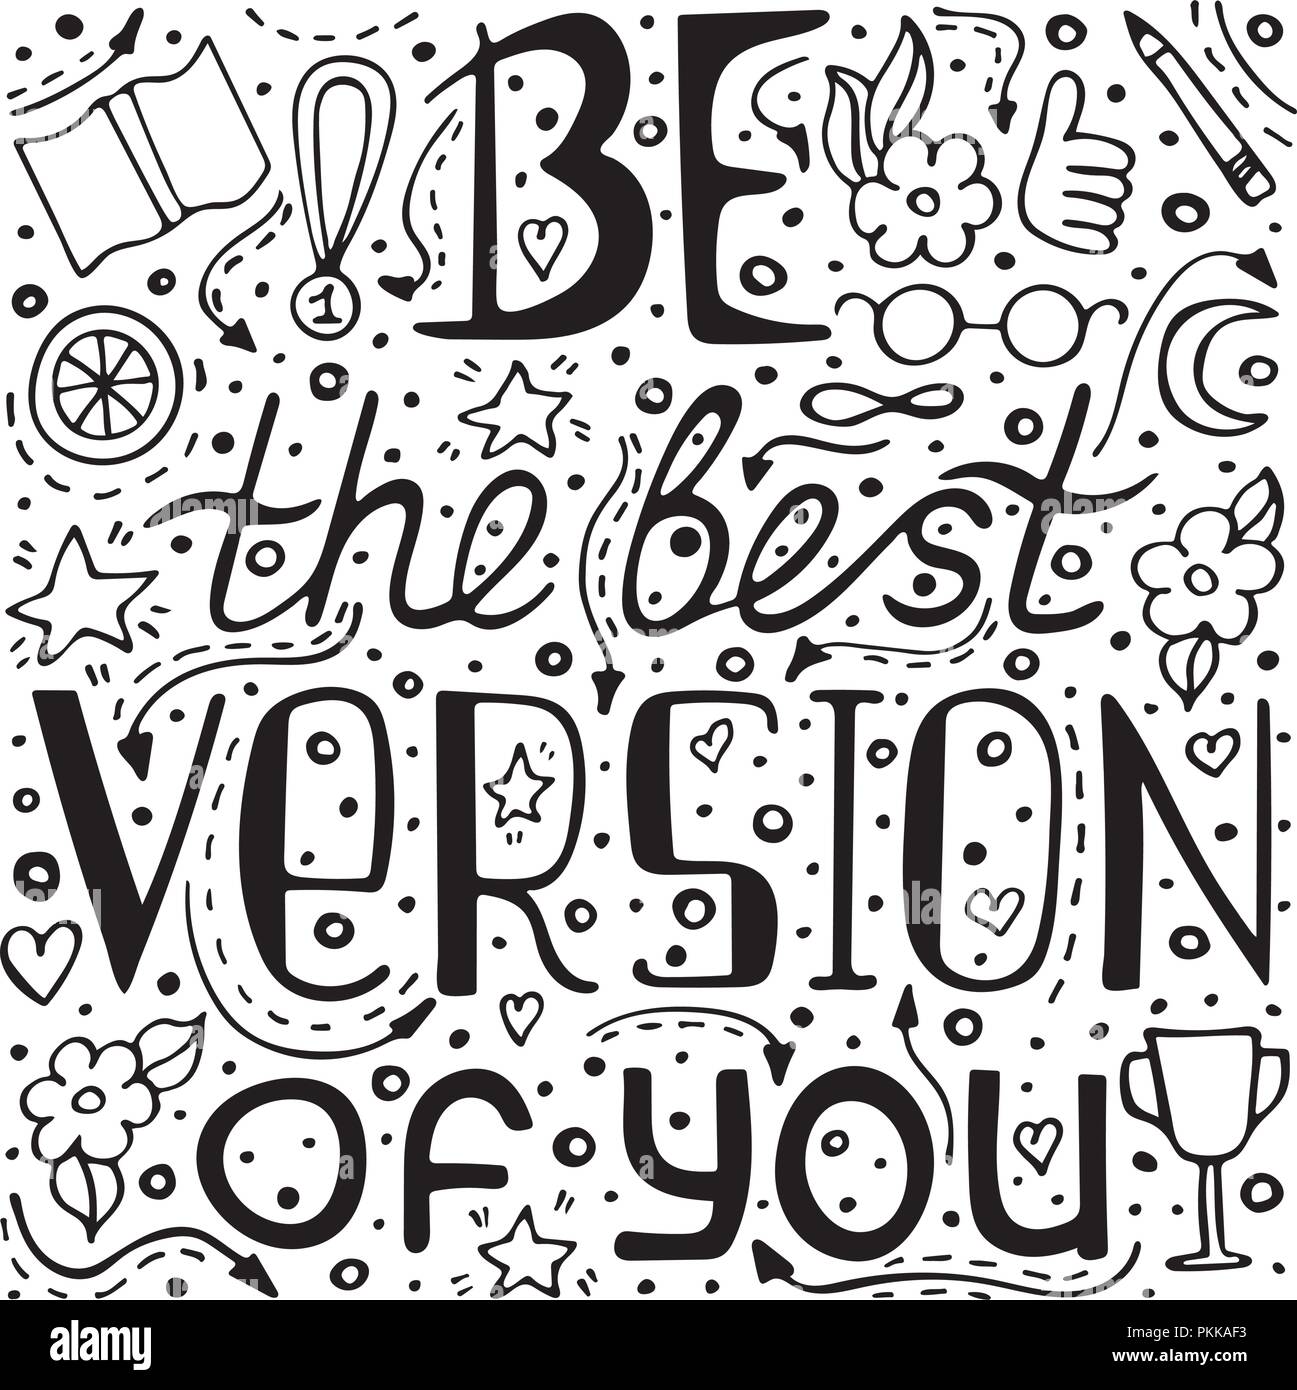 Unique monochrome hand drawn lettering quote with a phrase Be the best version of you. Stock Vector